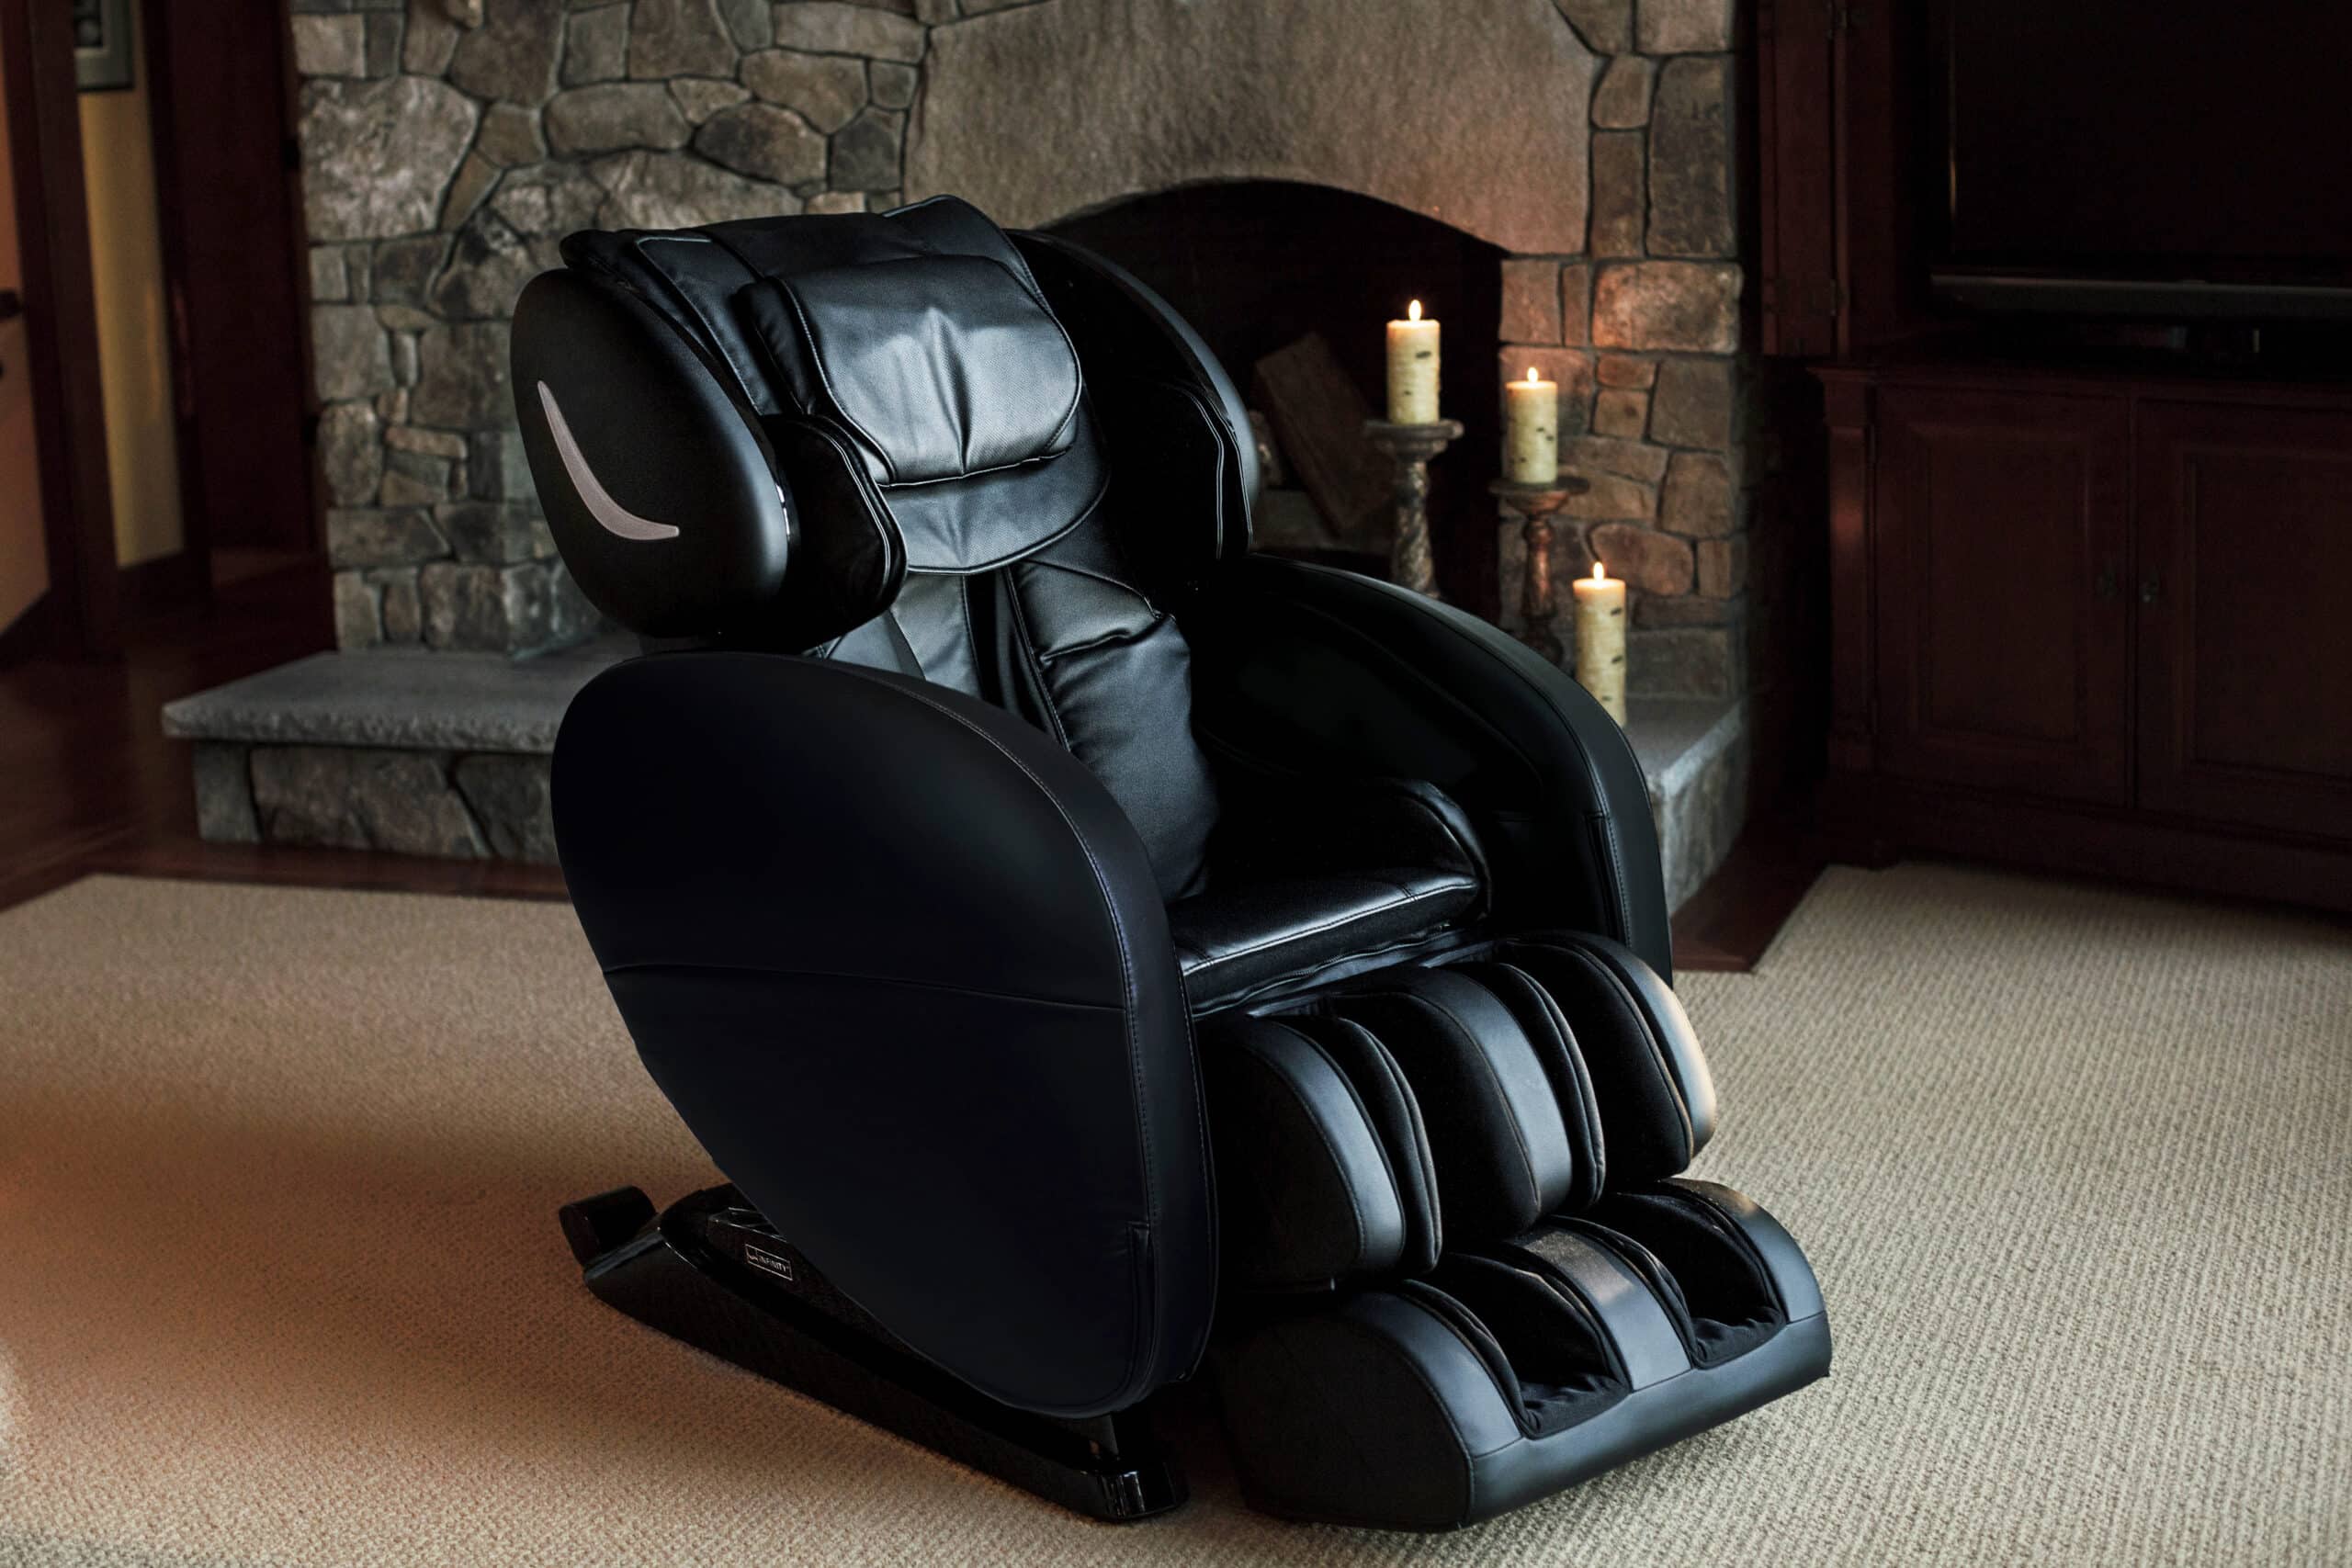 a black massage chair in front of a fireplace offering warmth and comfort in winter